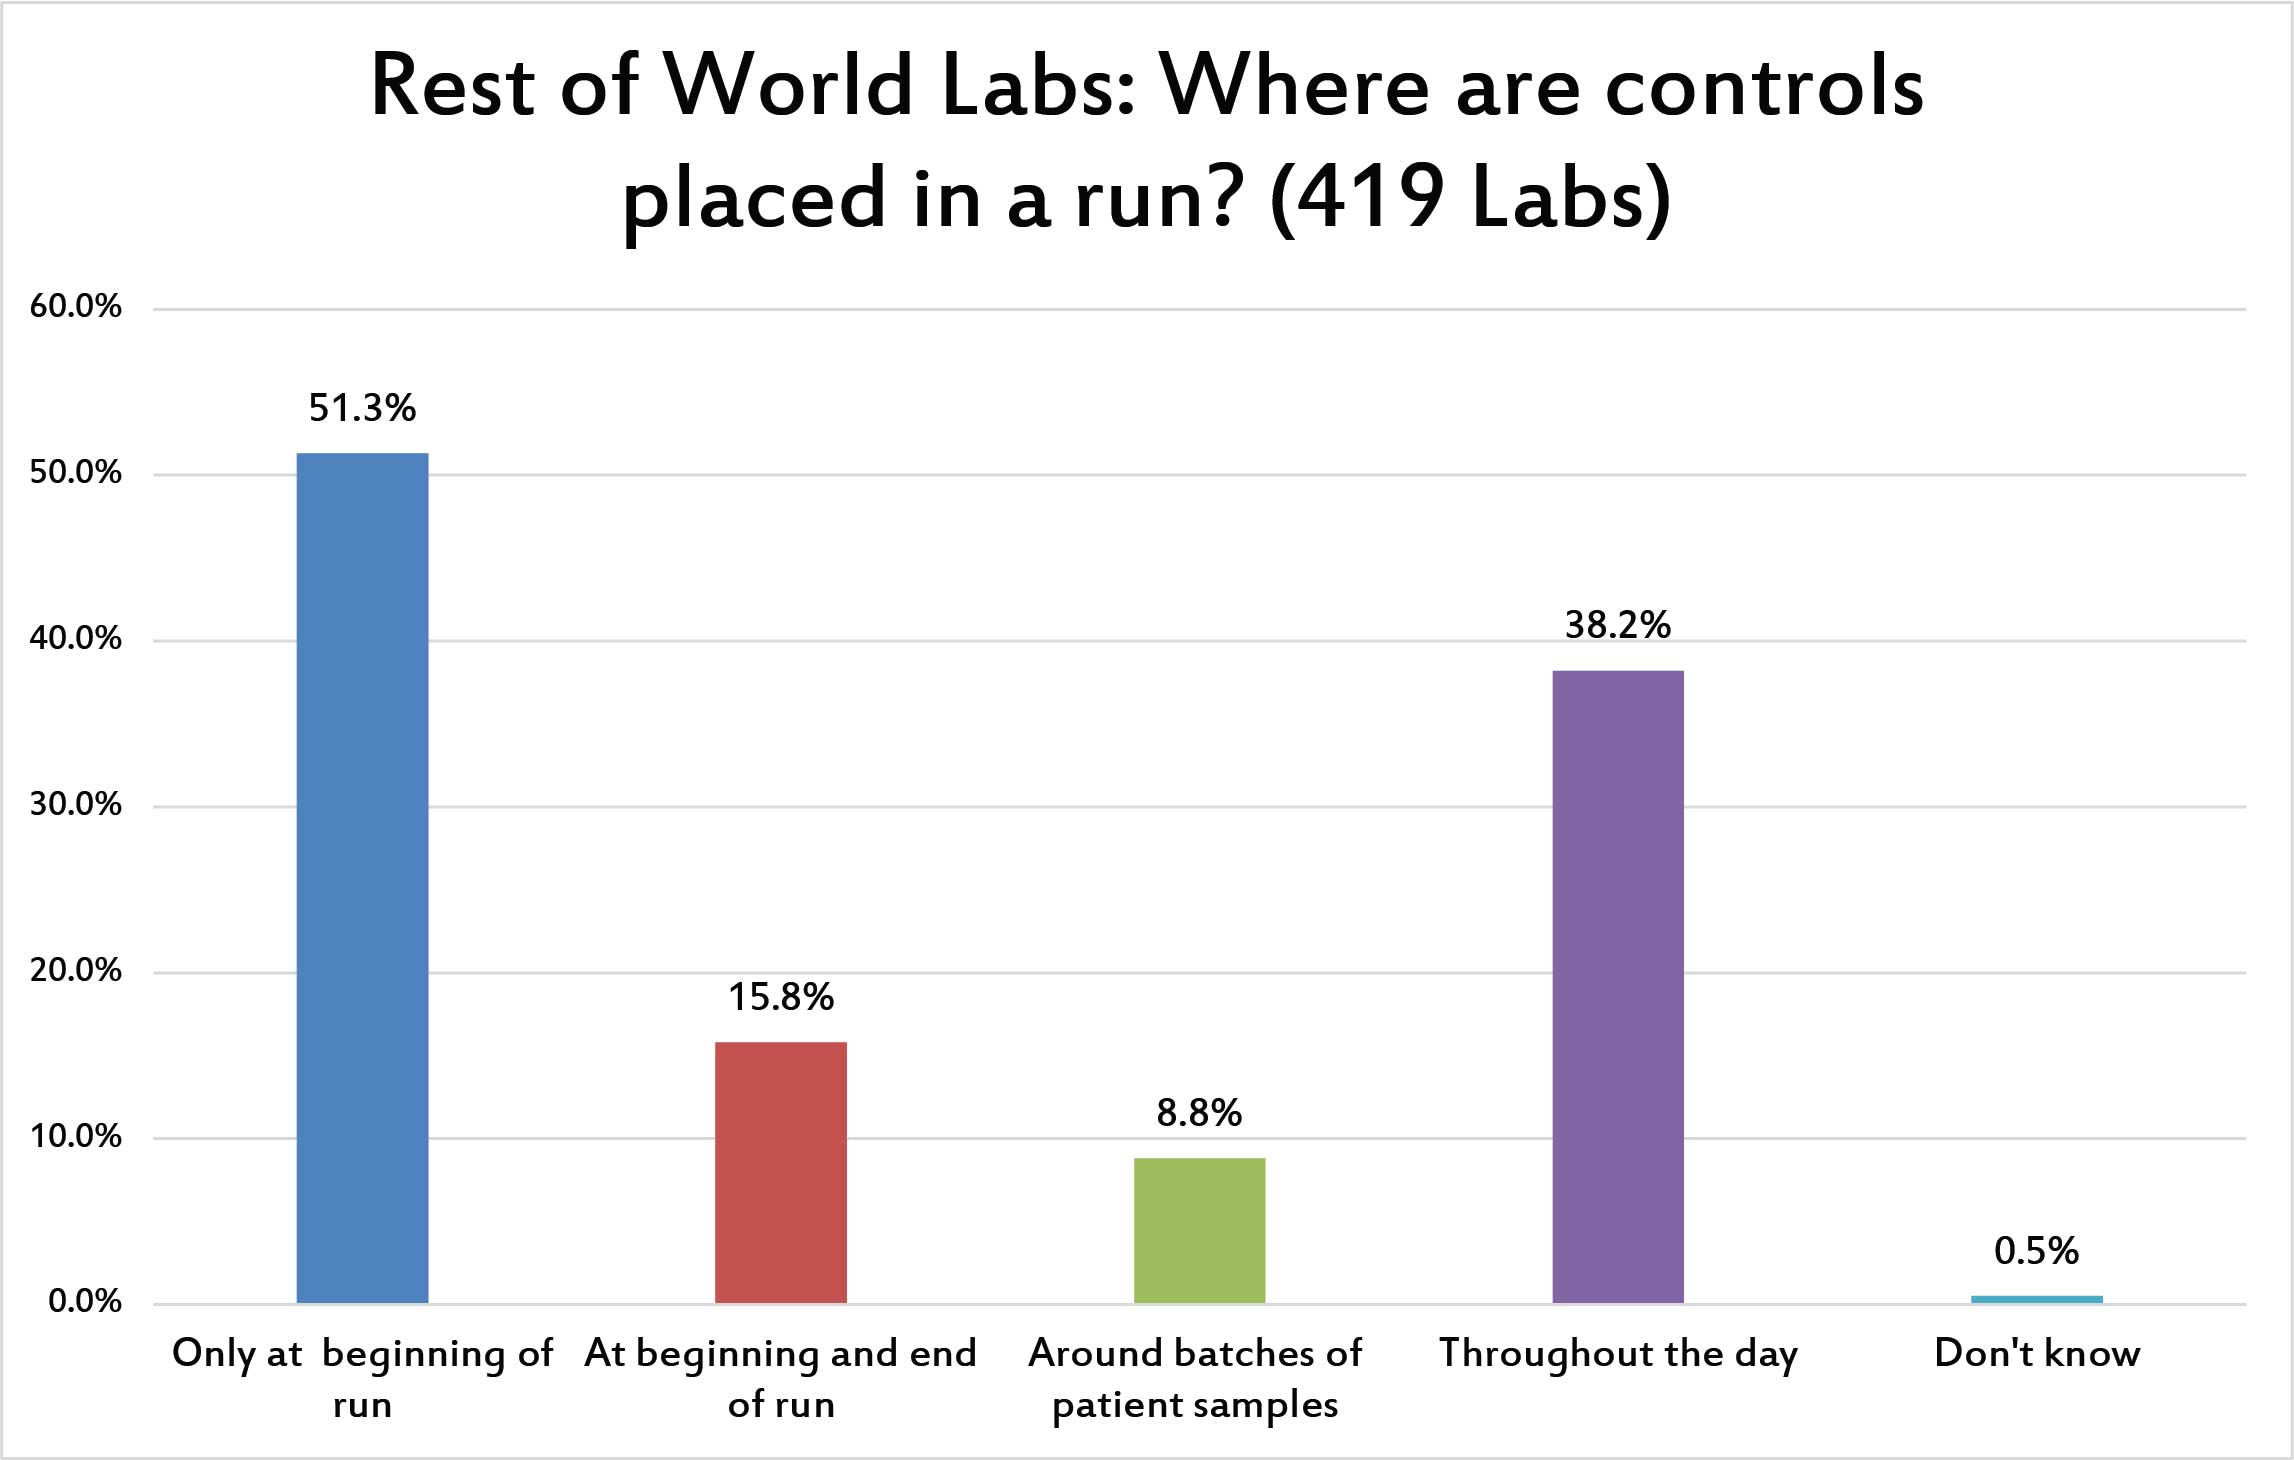 2017 Global QC Survey rest of world: where are controls placed?